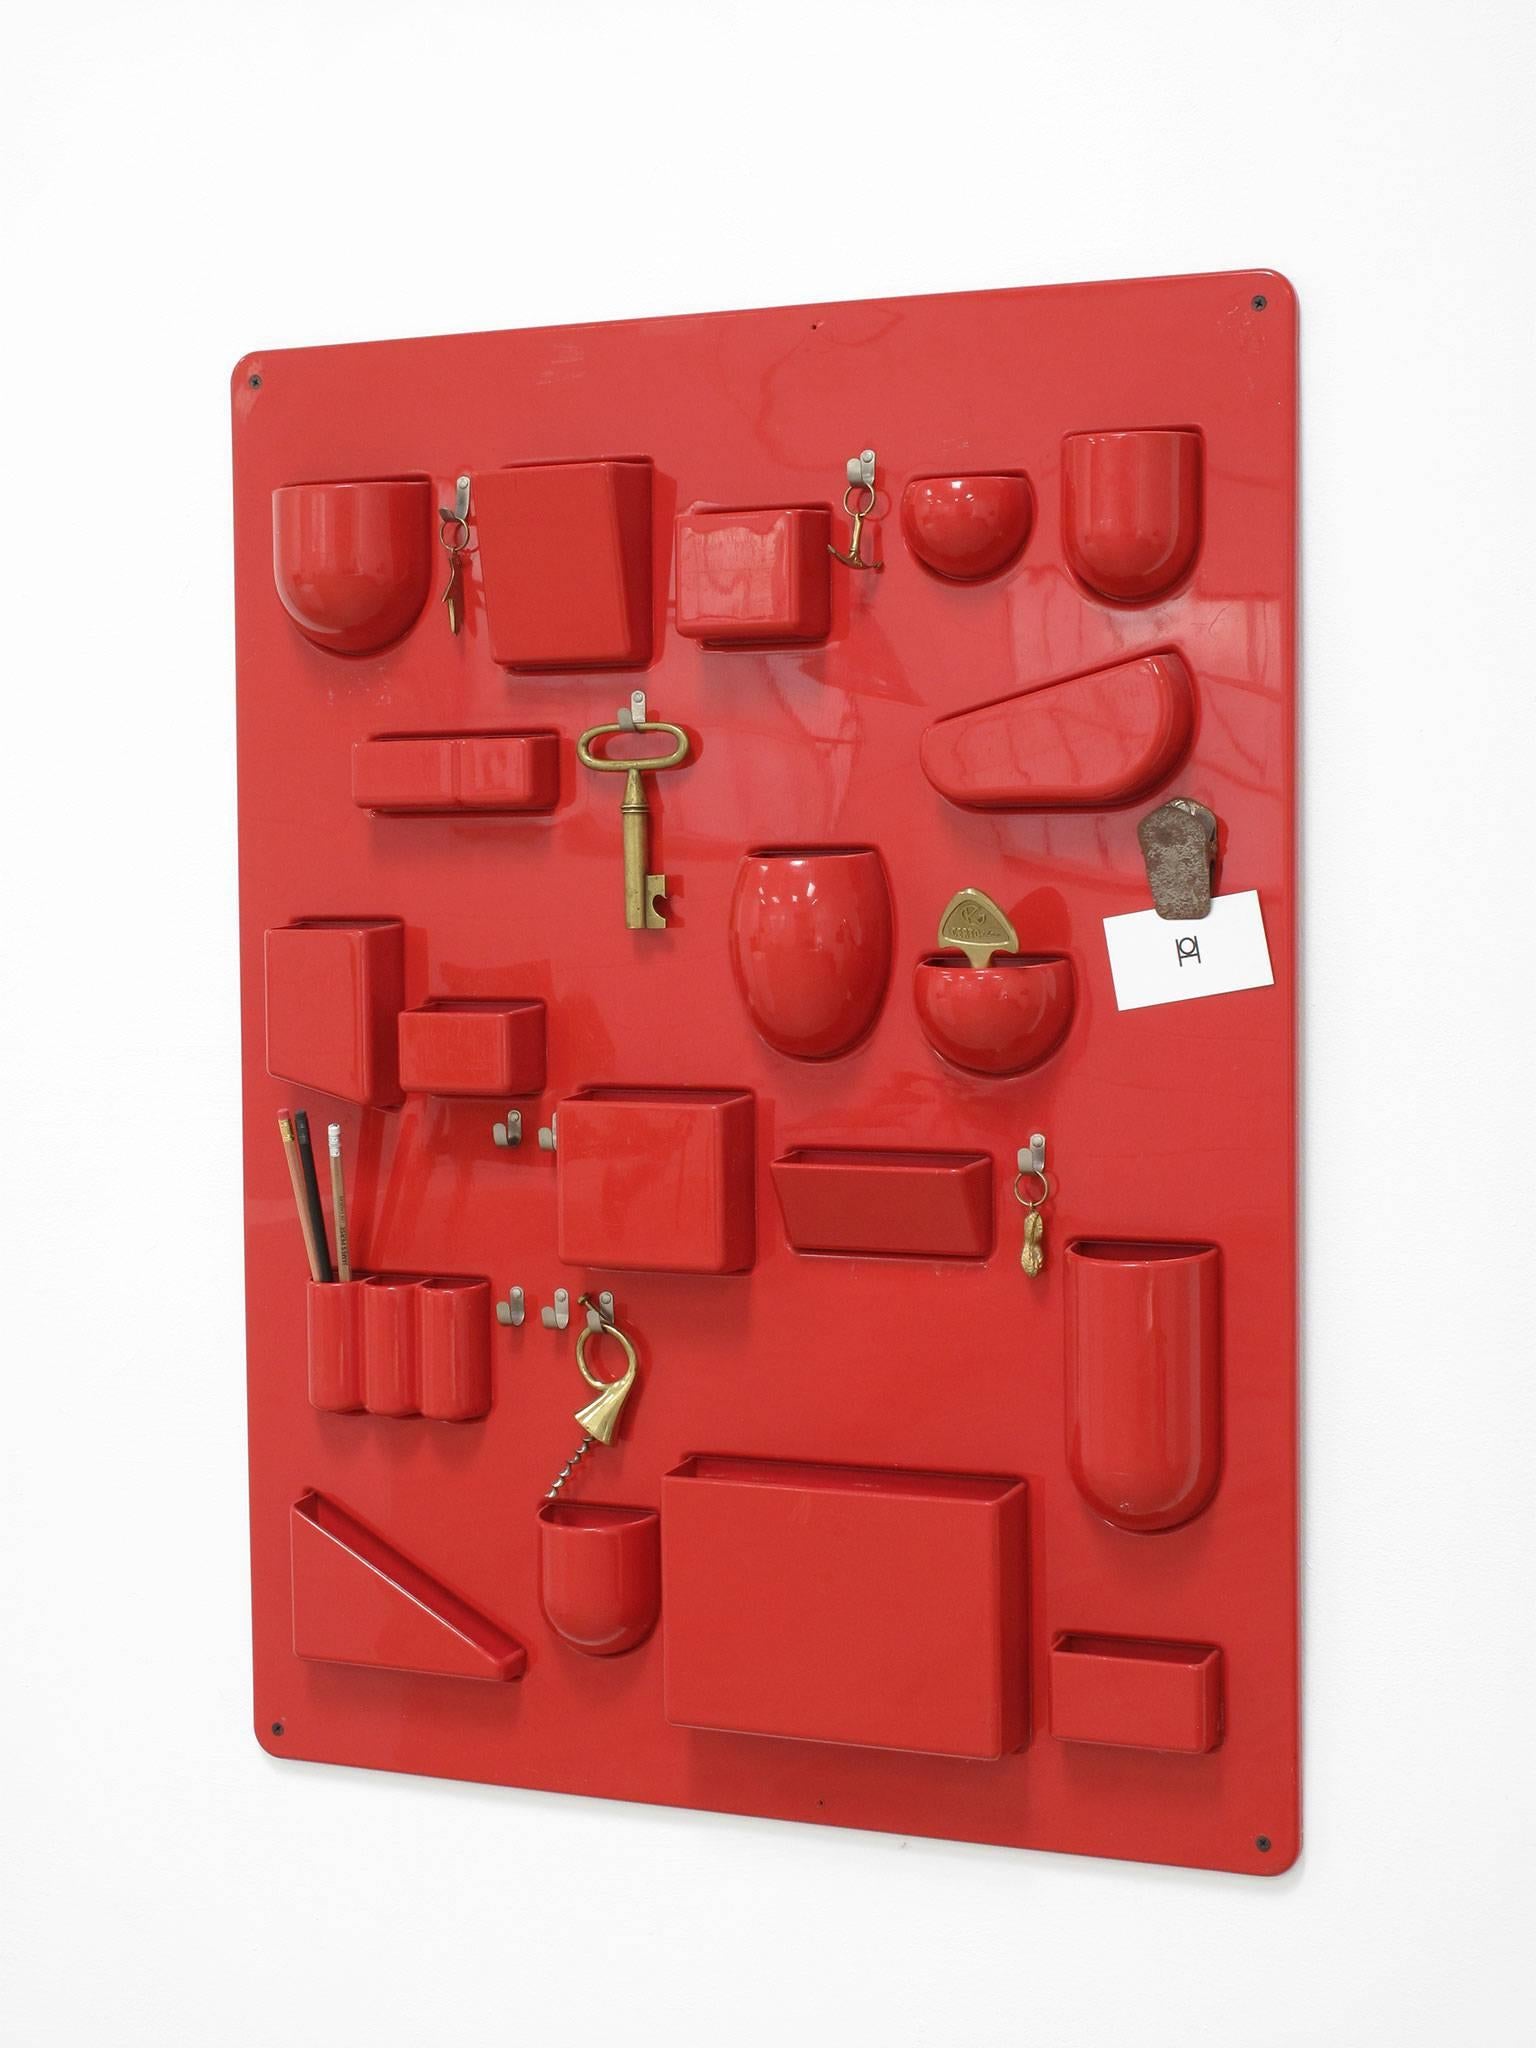 Dorothee Maurer-Becker 'Uten.Silo' Wall Organizer, 1970s In Good Condition For Sale In Los Angeles, CA